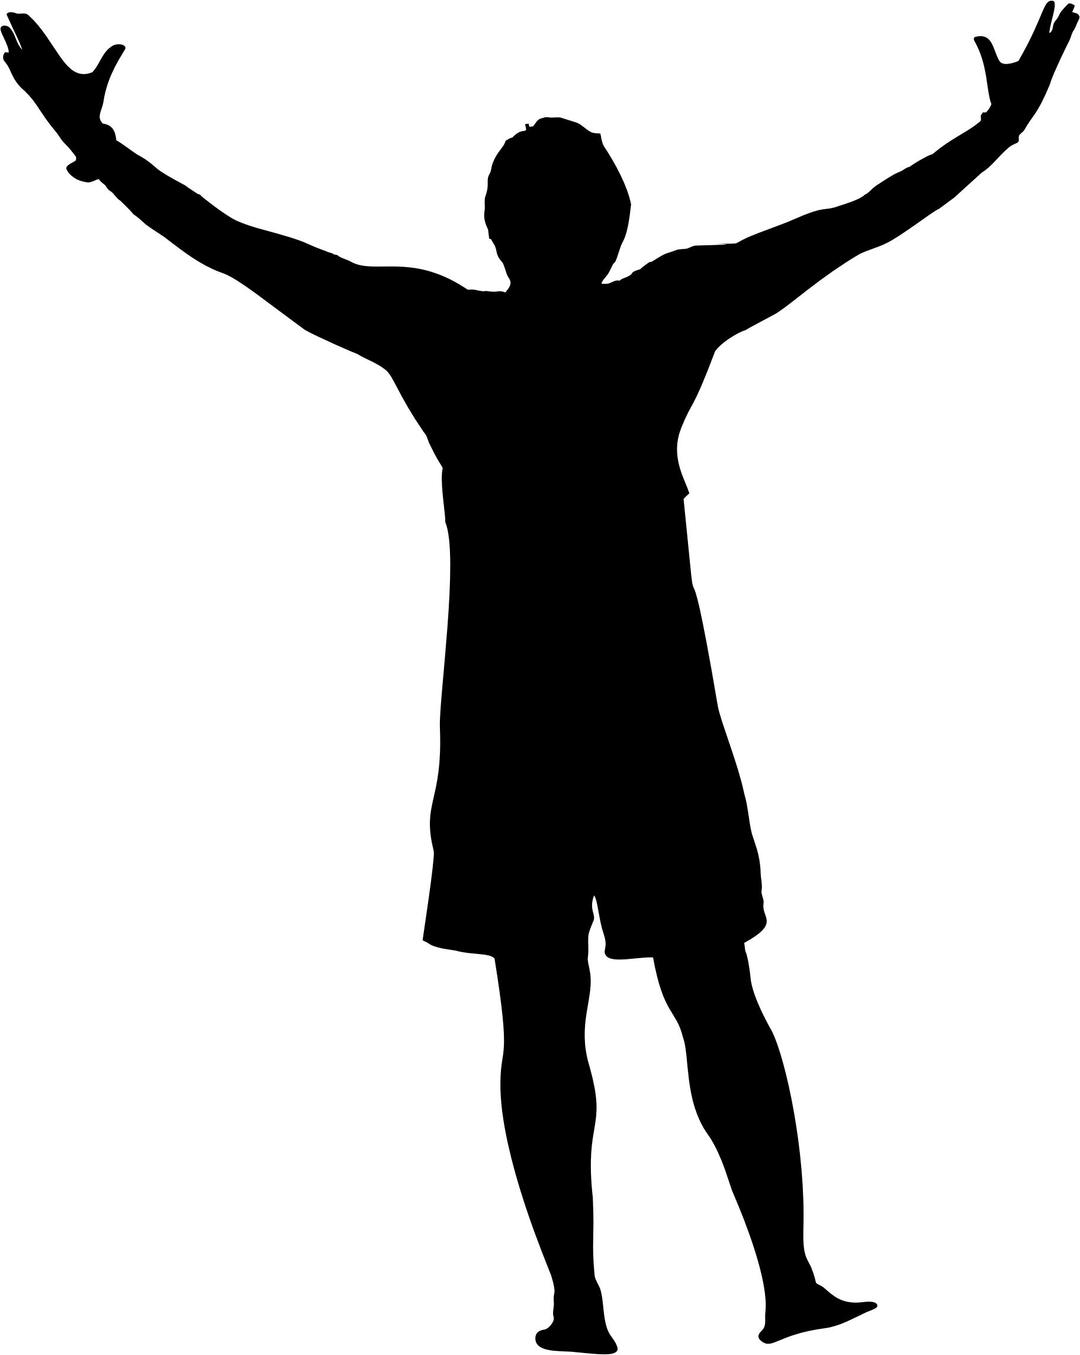 Victory Man Silhouette png transparent